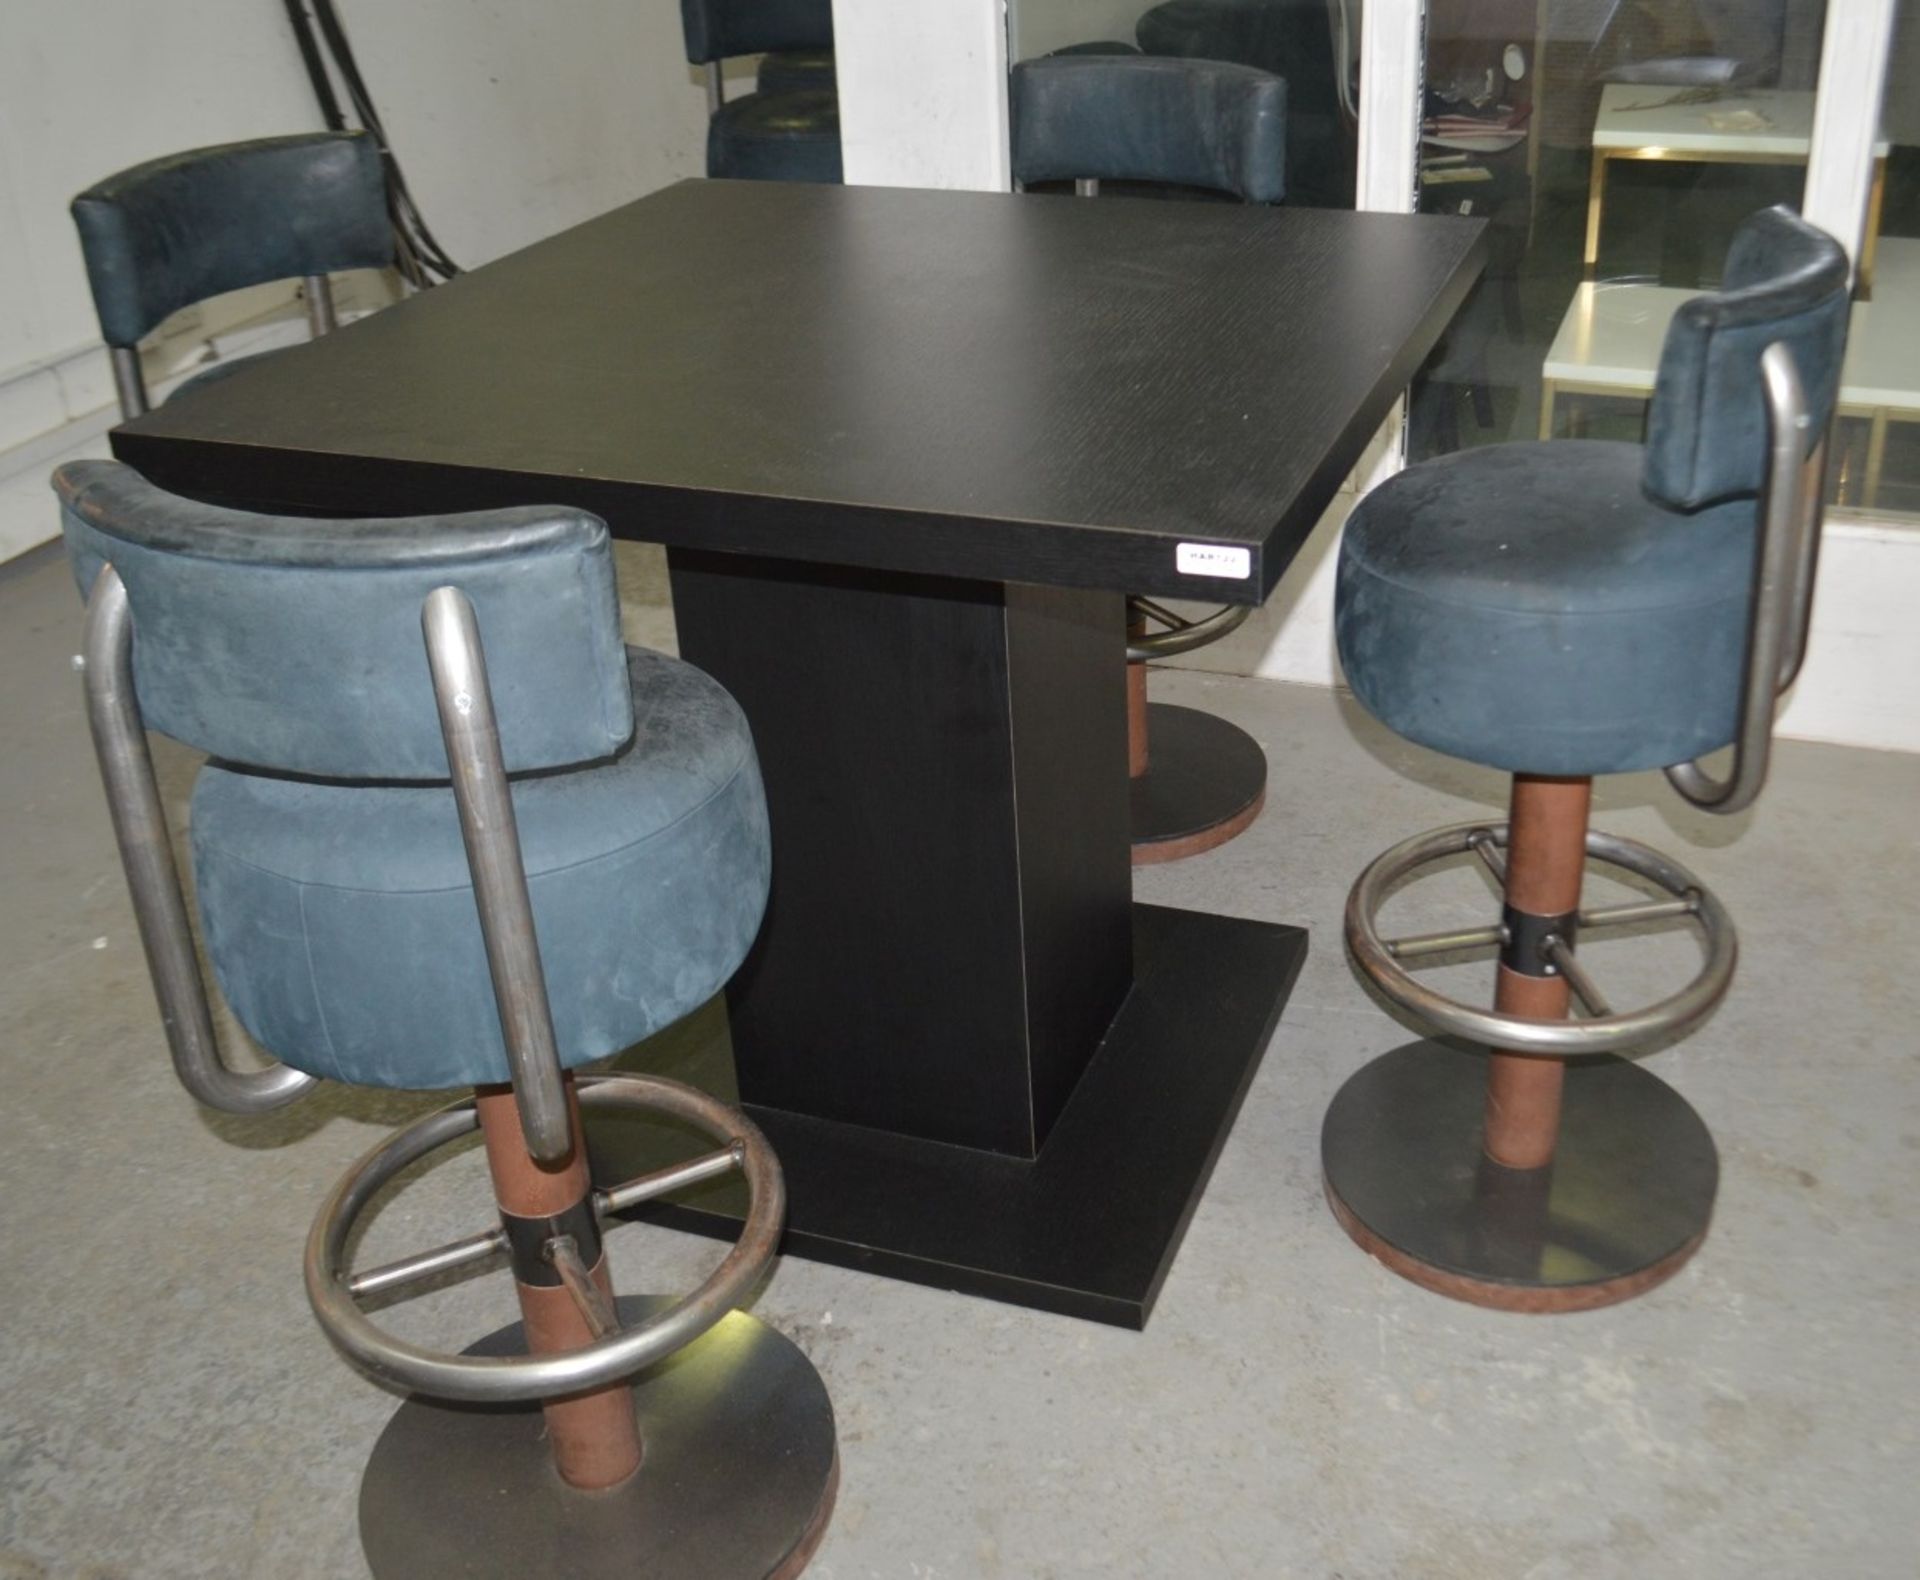 1 x Large Square Dining / Meeting Table In A Dark Wood Veneer With 4 Leather Upholstered Stools - Image 2 of 10